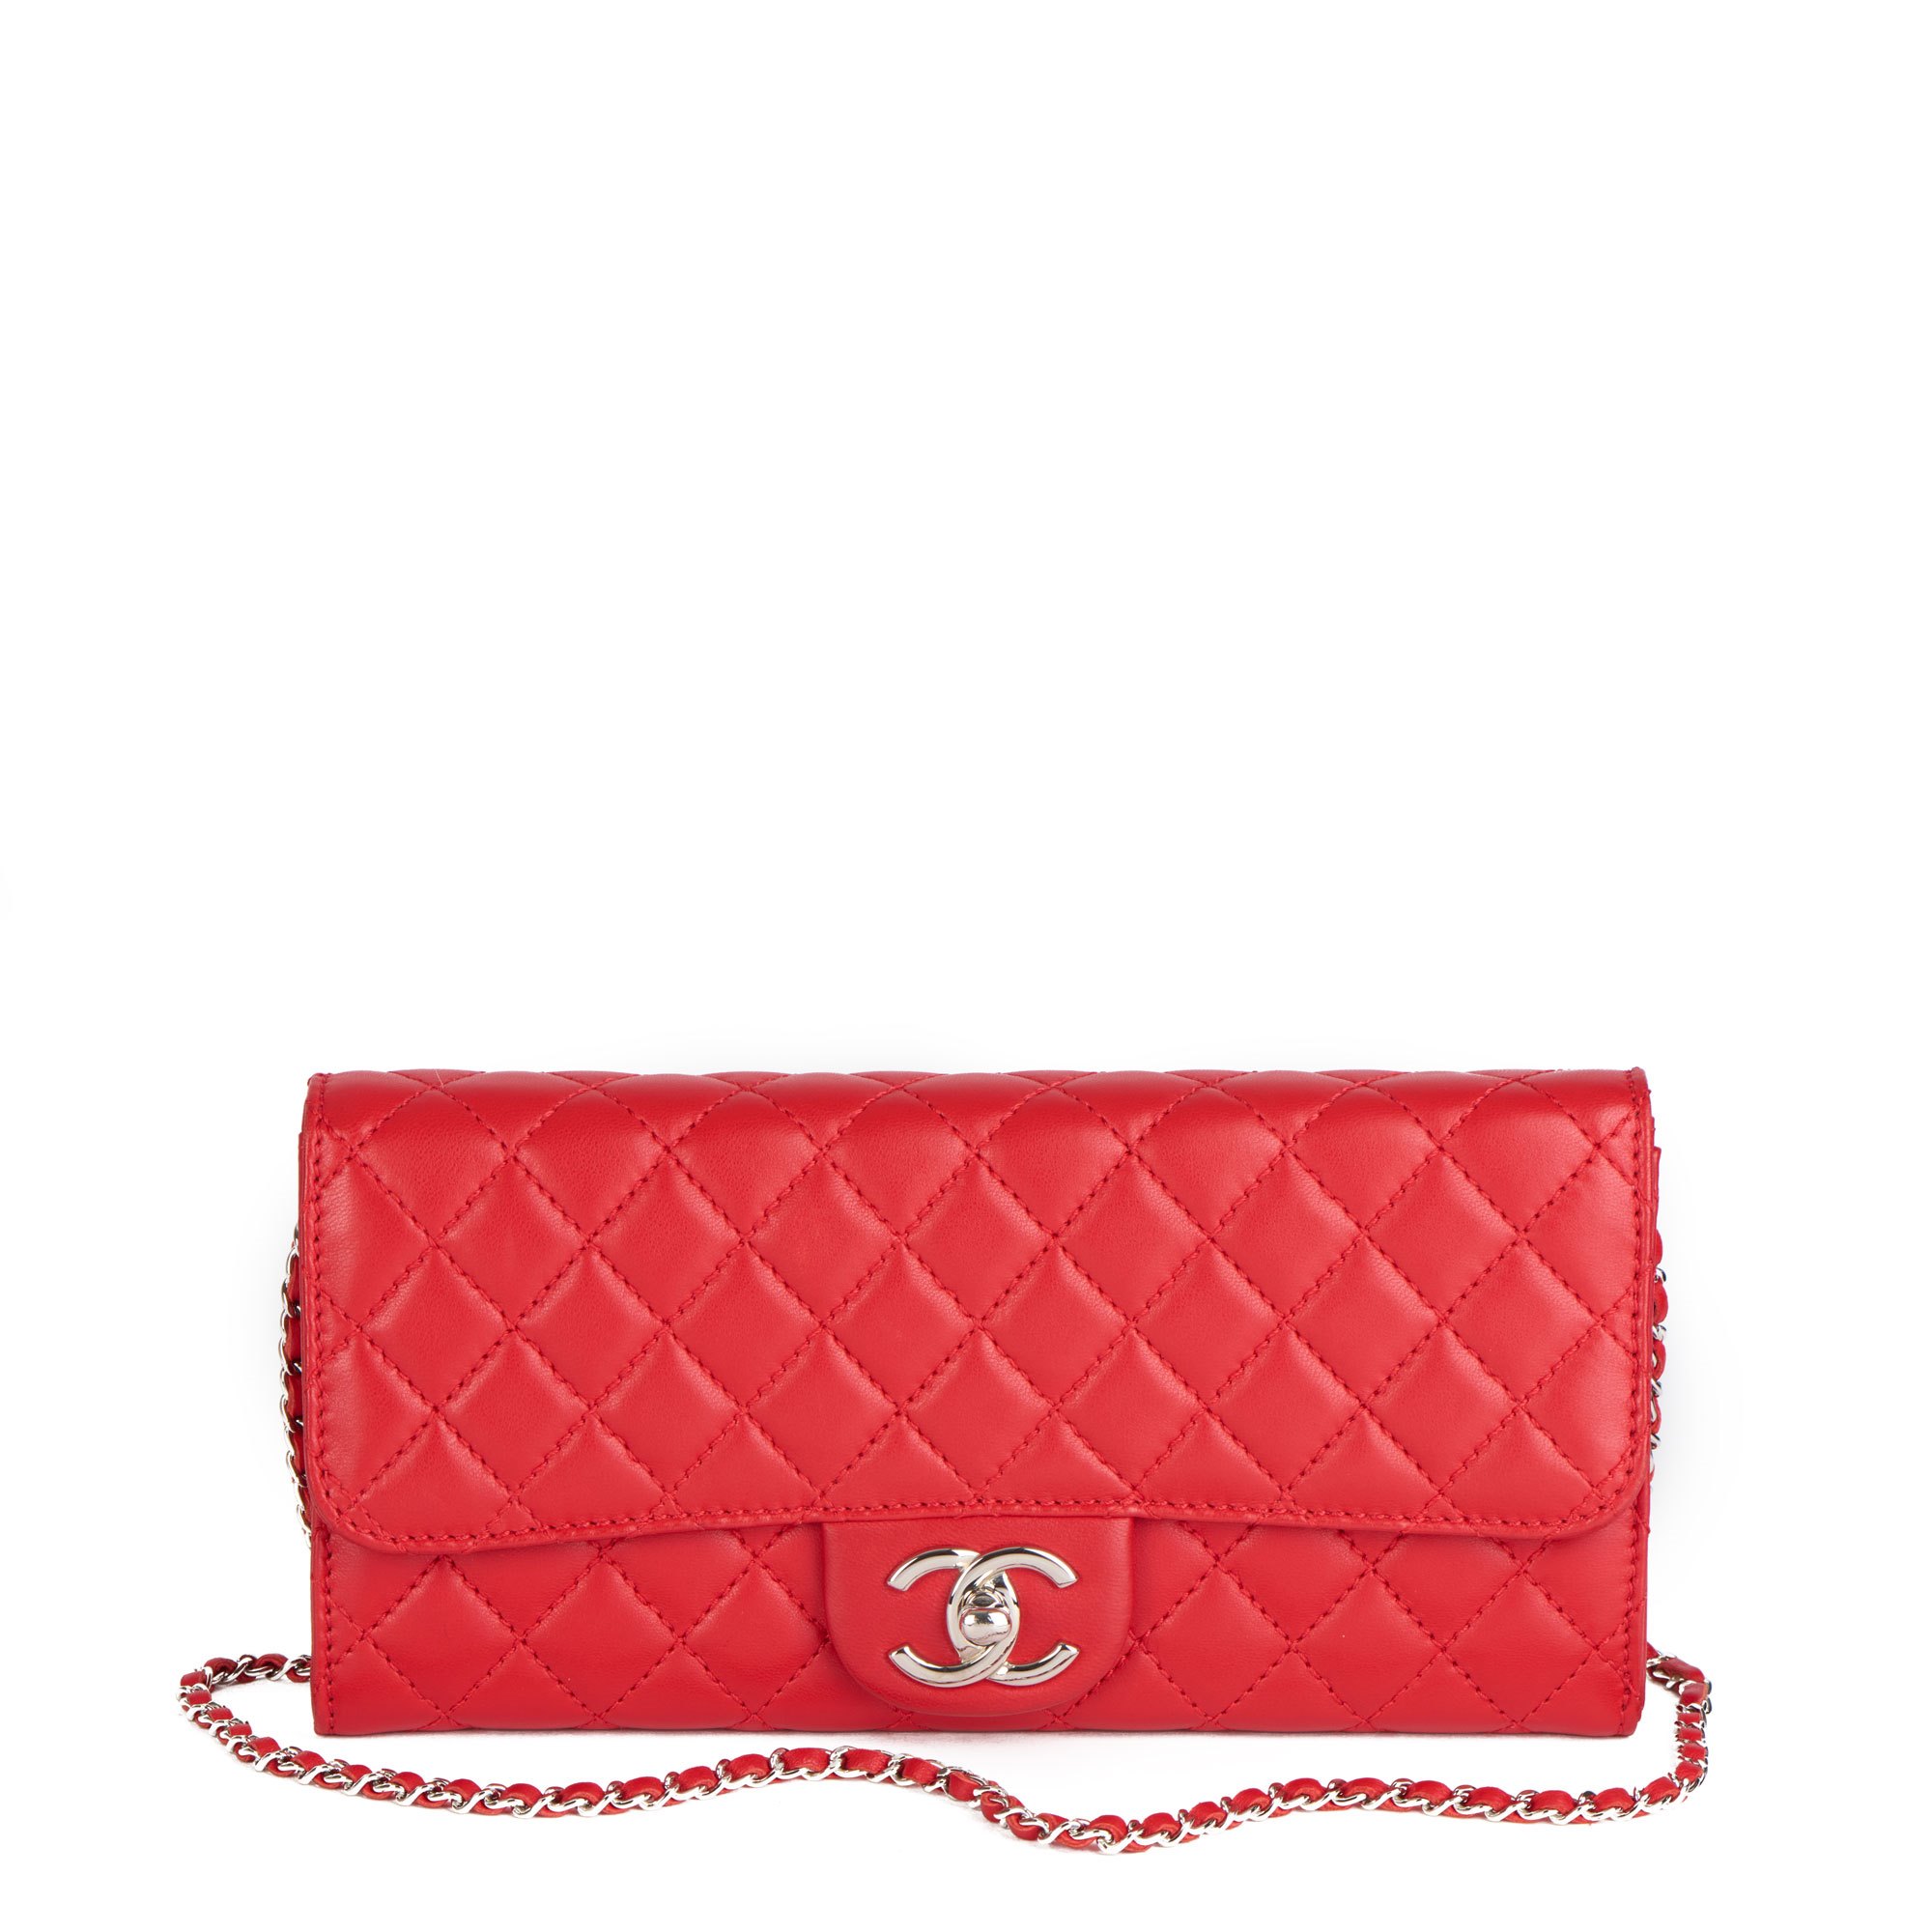 Chanel Classic Clutch-on-Chain 2011 HB4177 | Second Hand Handbags